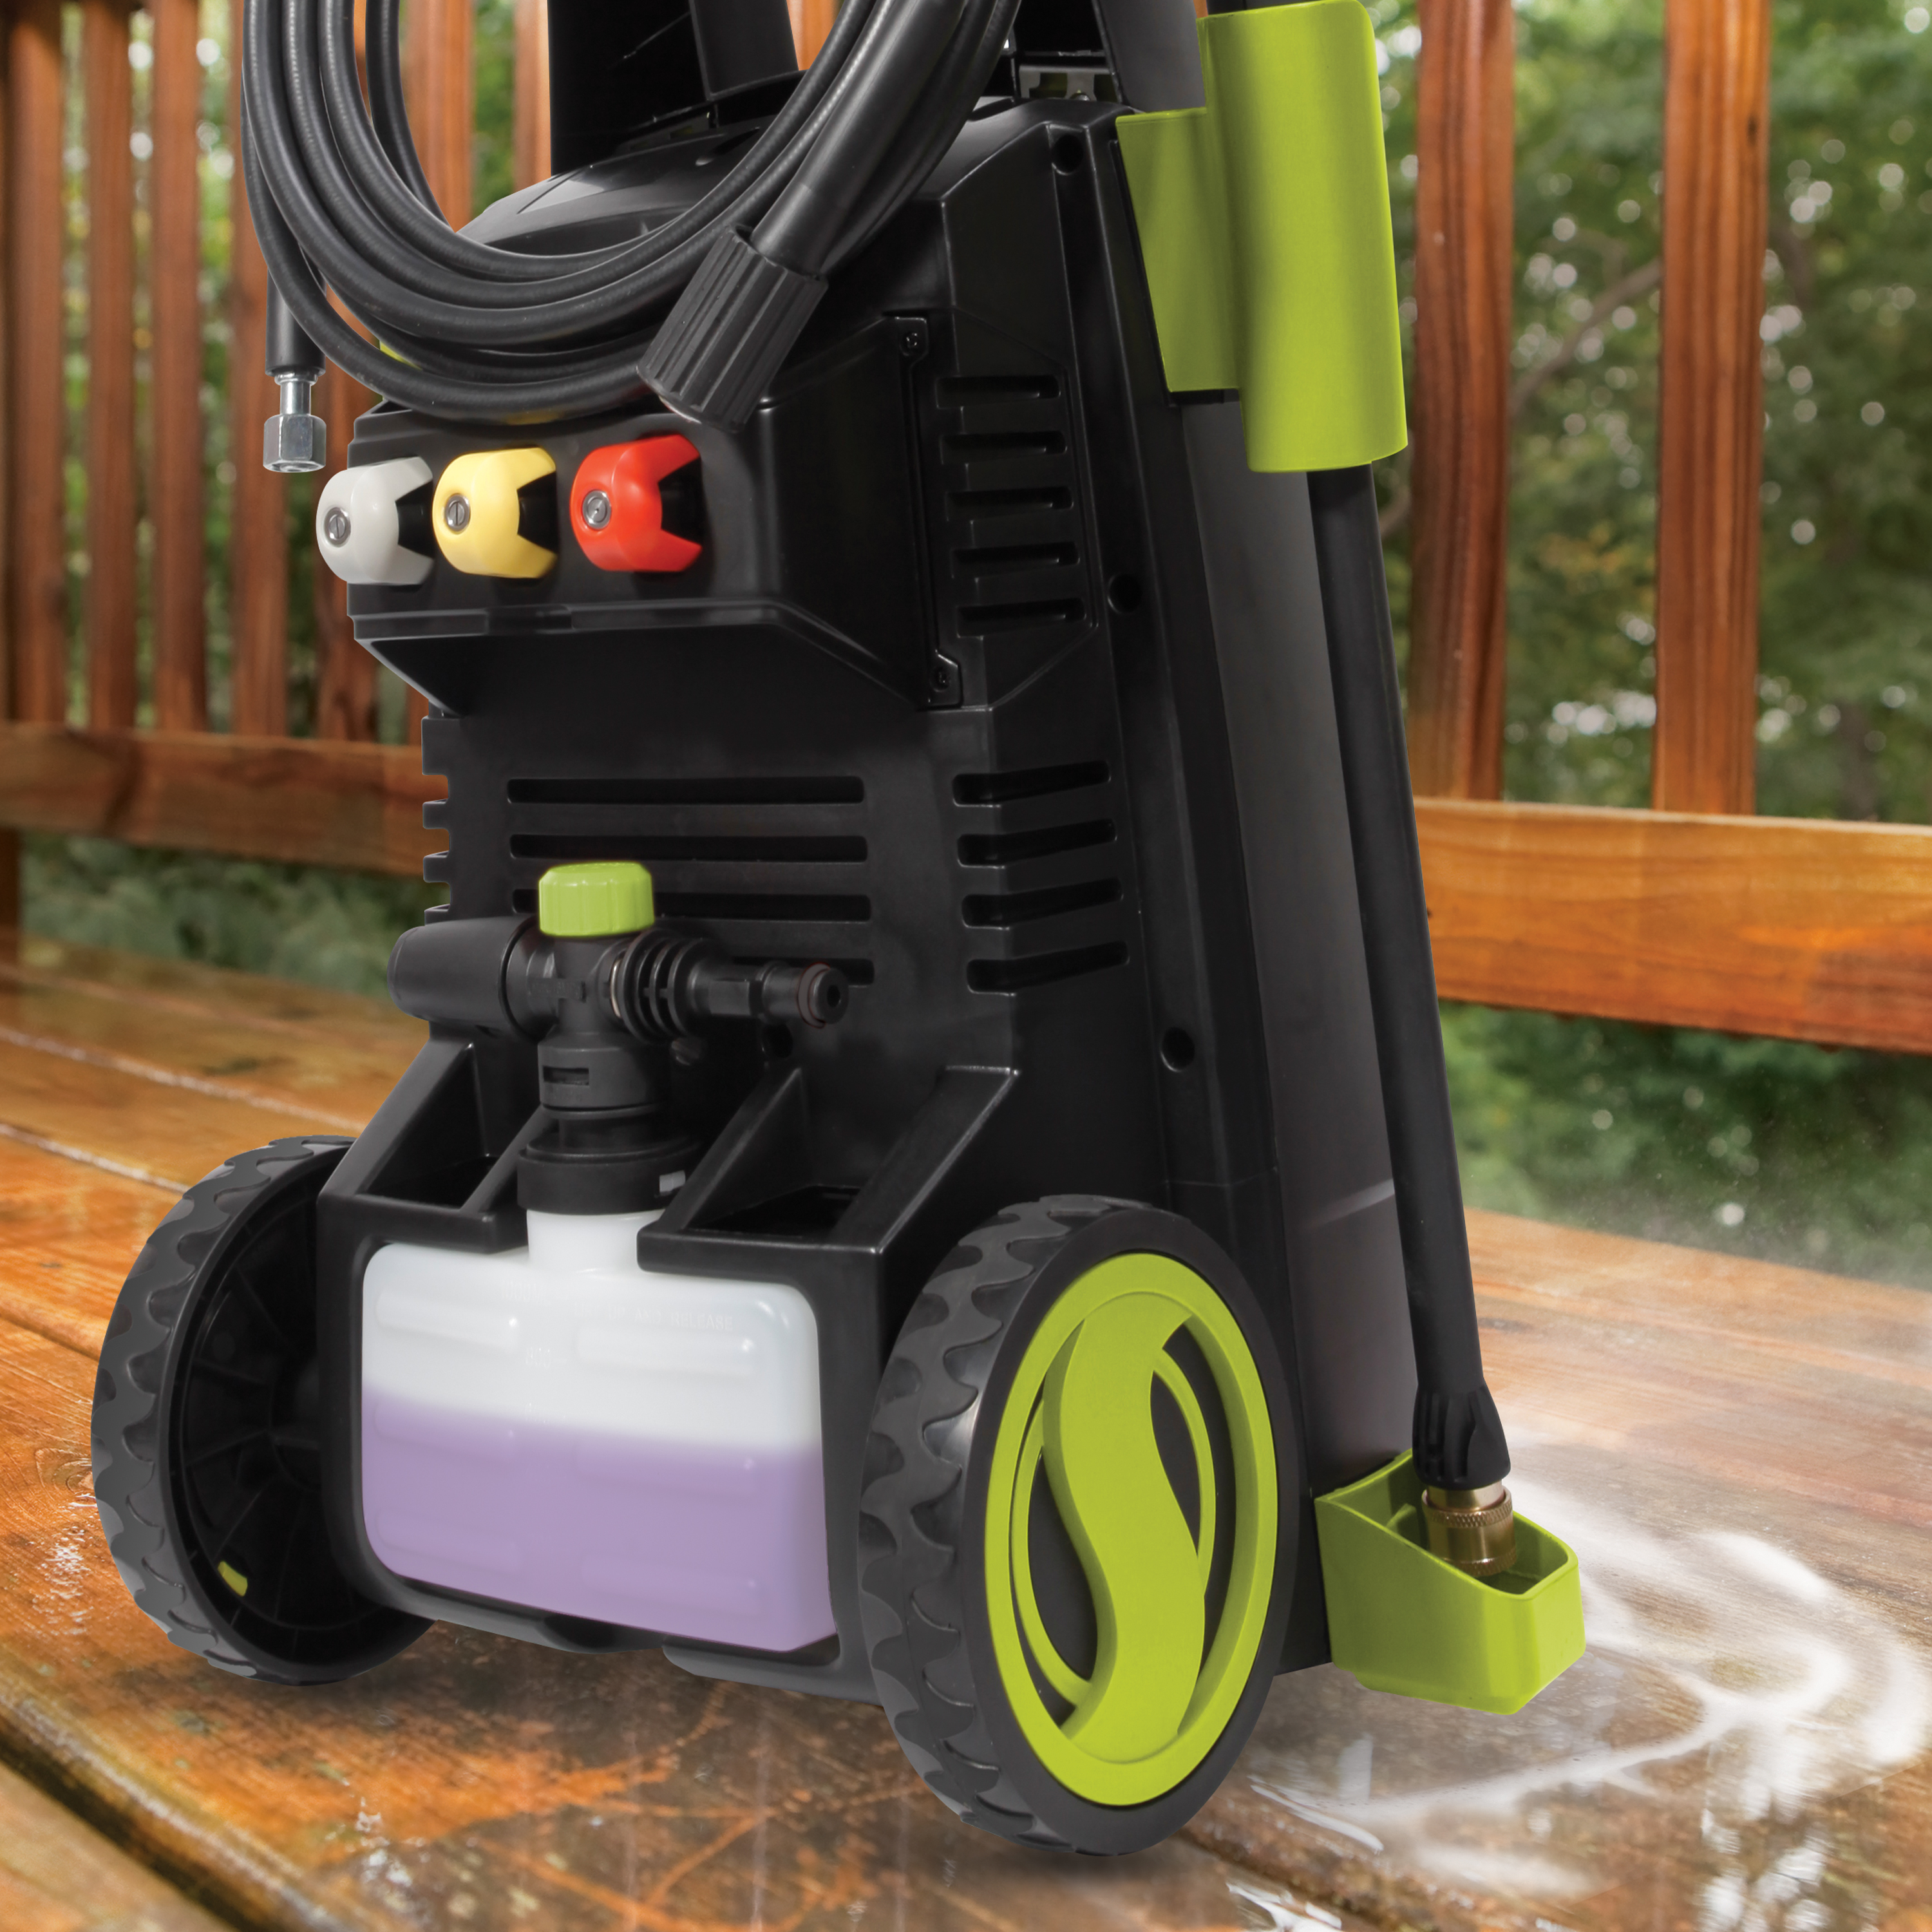 Sun Joe SPX2688-MAX Electric Pressure Washer, 13-Amp, Foam Cannon, Quick-Connect Tips - image 3 of 6